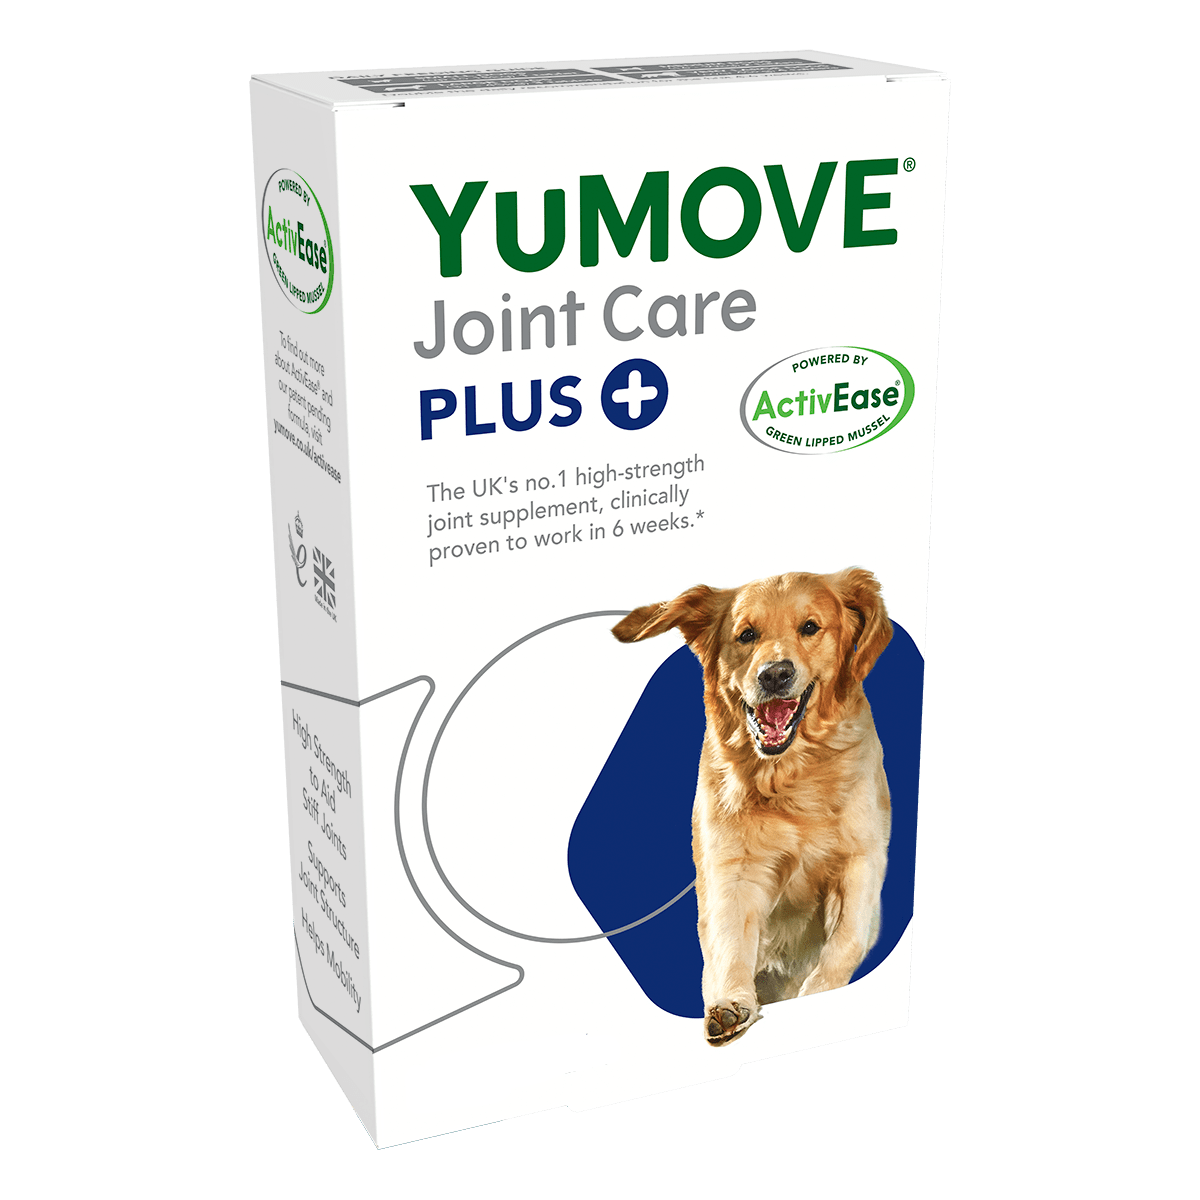 YuMOVE Joint Care PLUS for Dogs - Subscription and Starter Pack